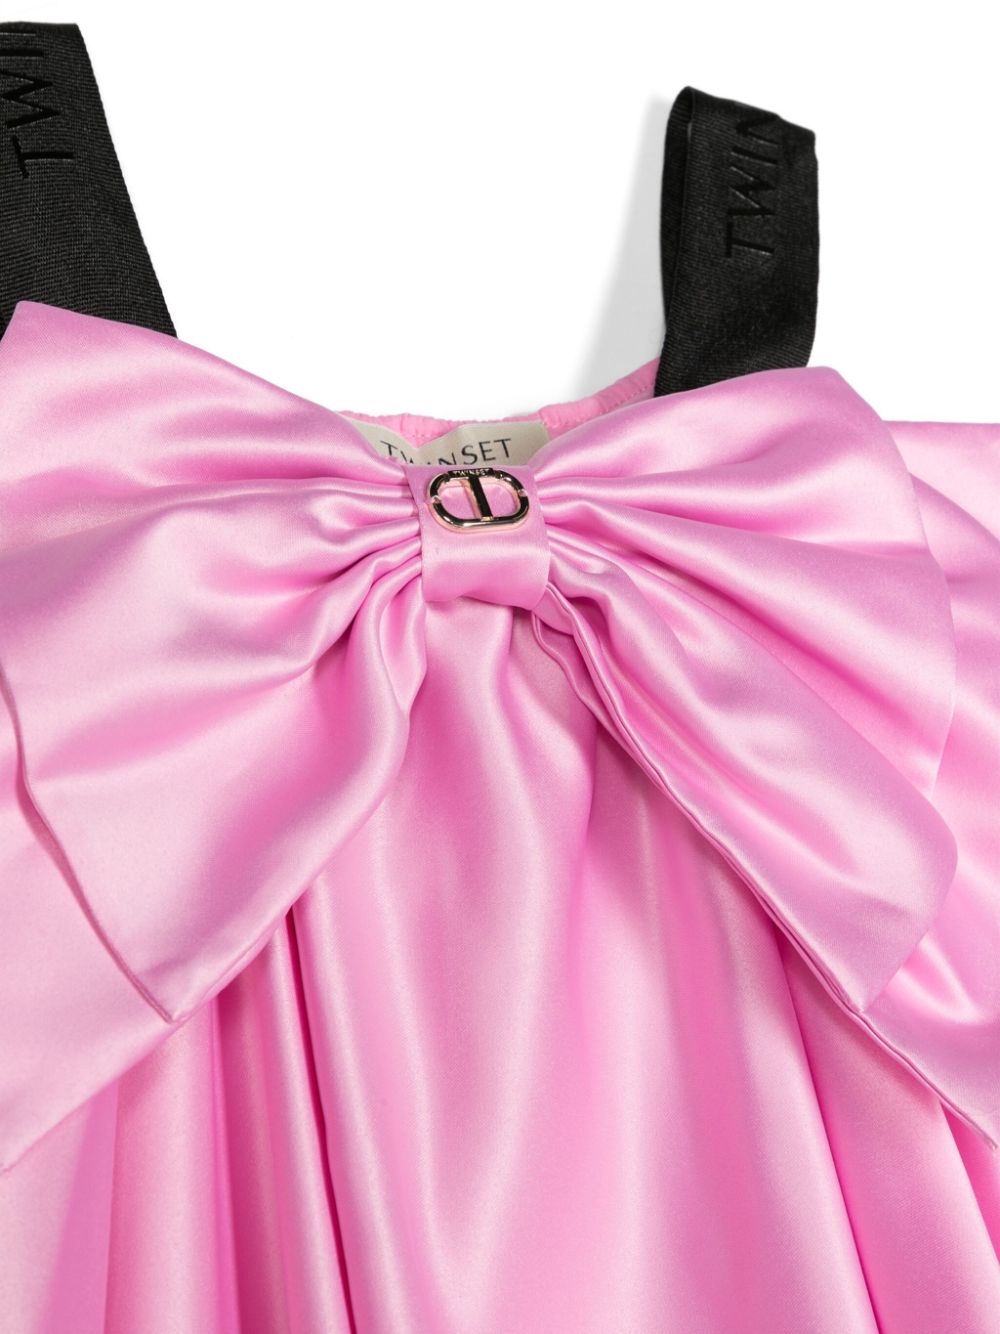 Pink dress for girls with bow